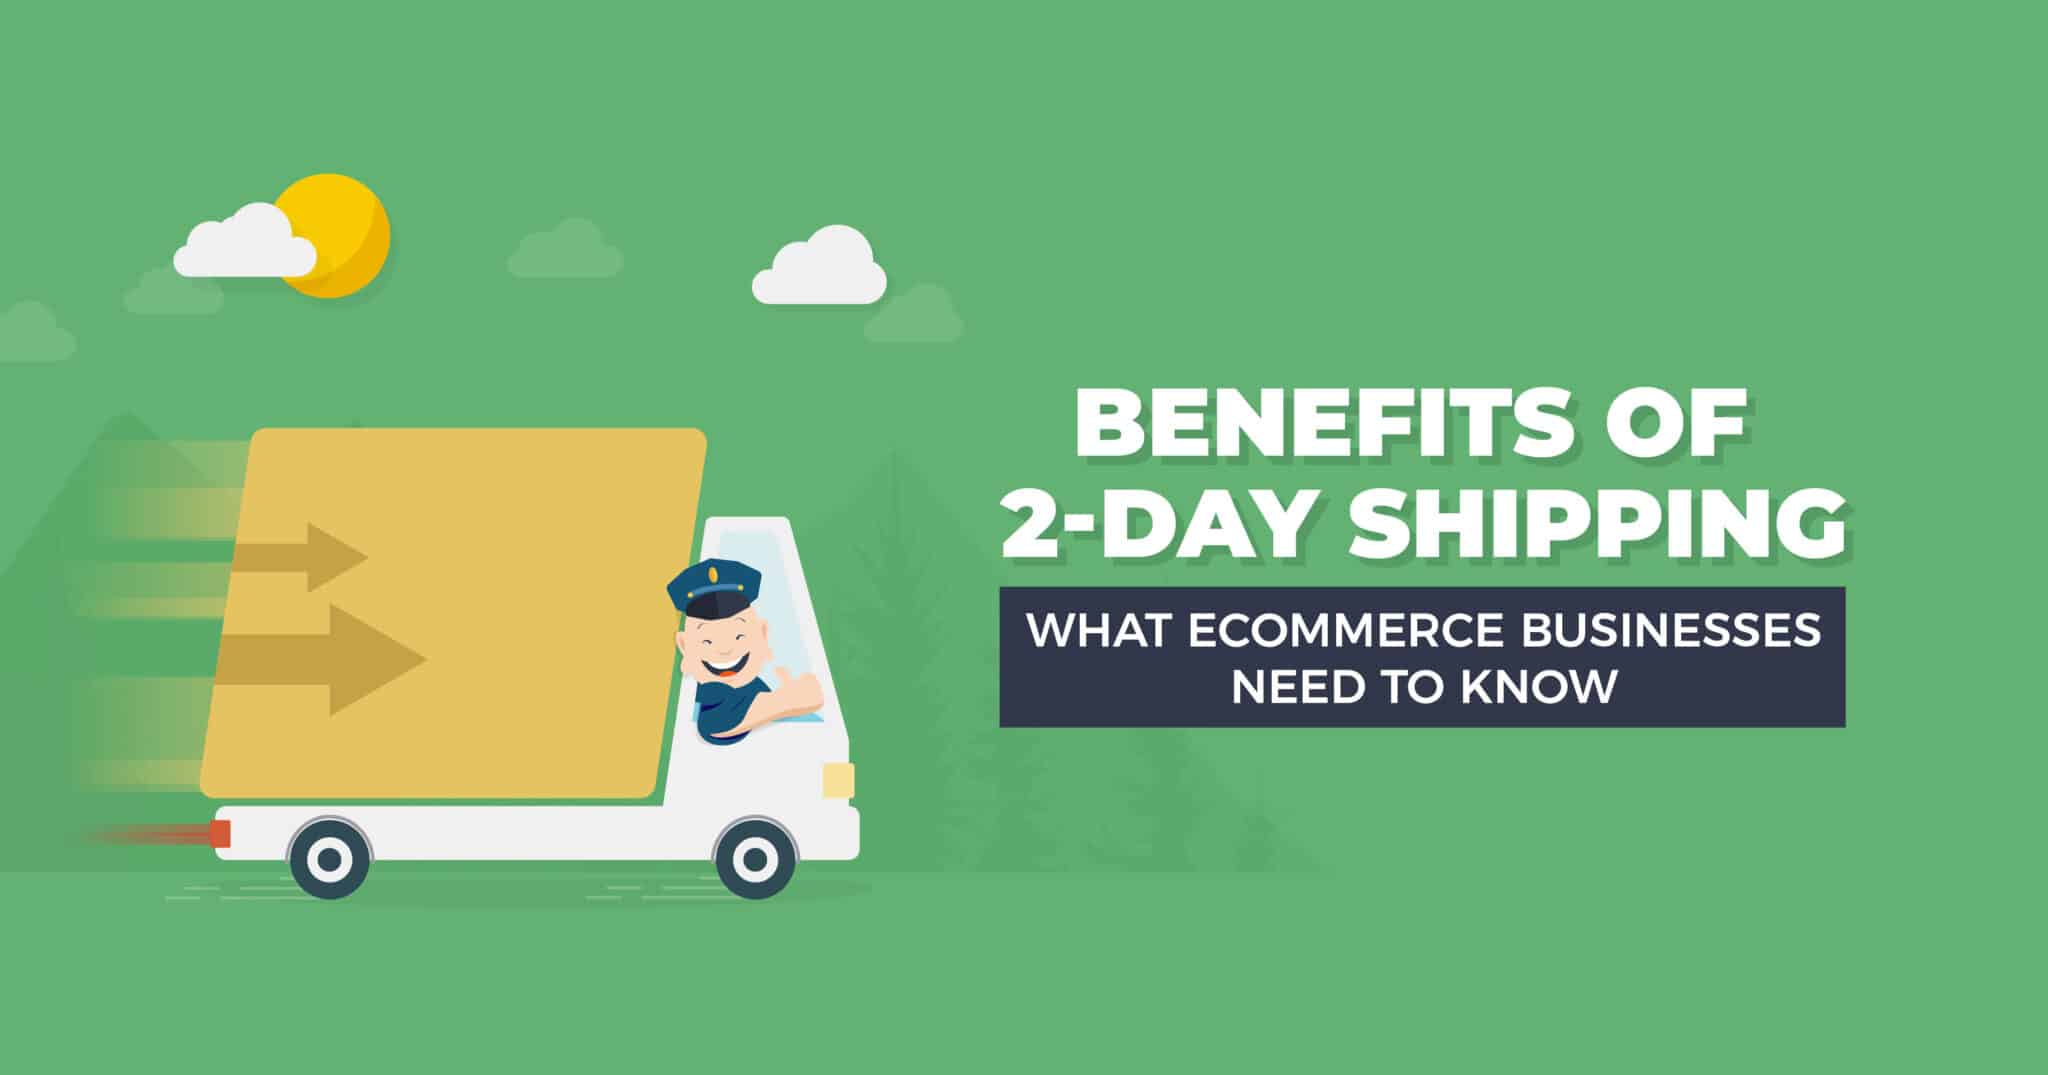 Benefits of 2-Day Shipping